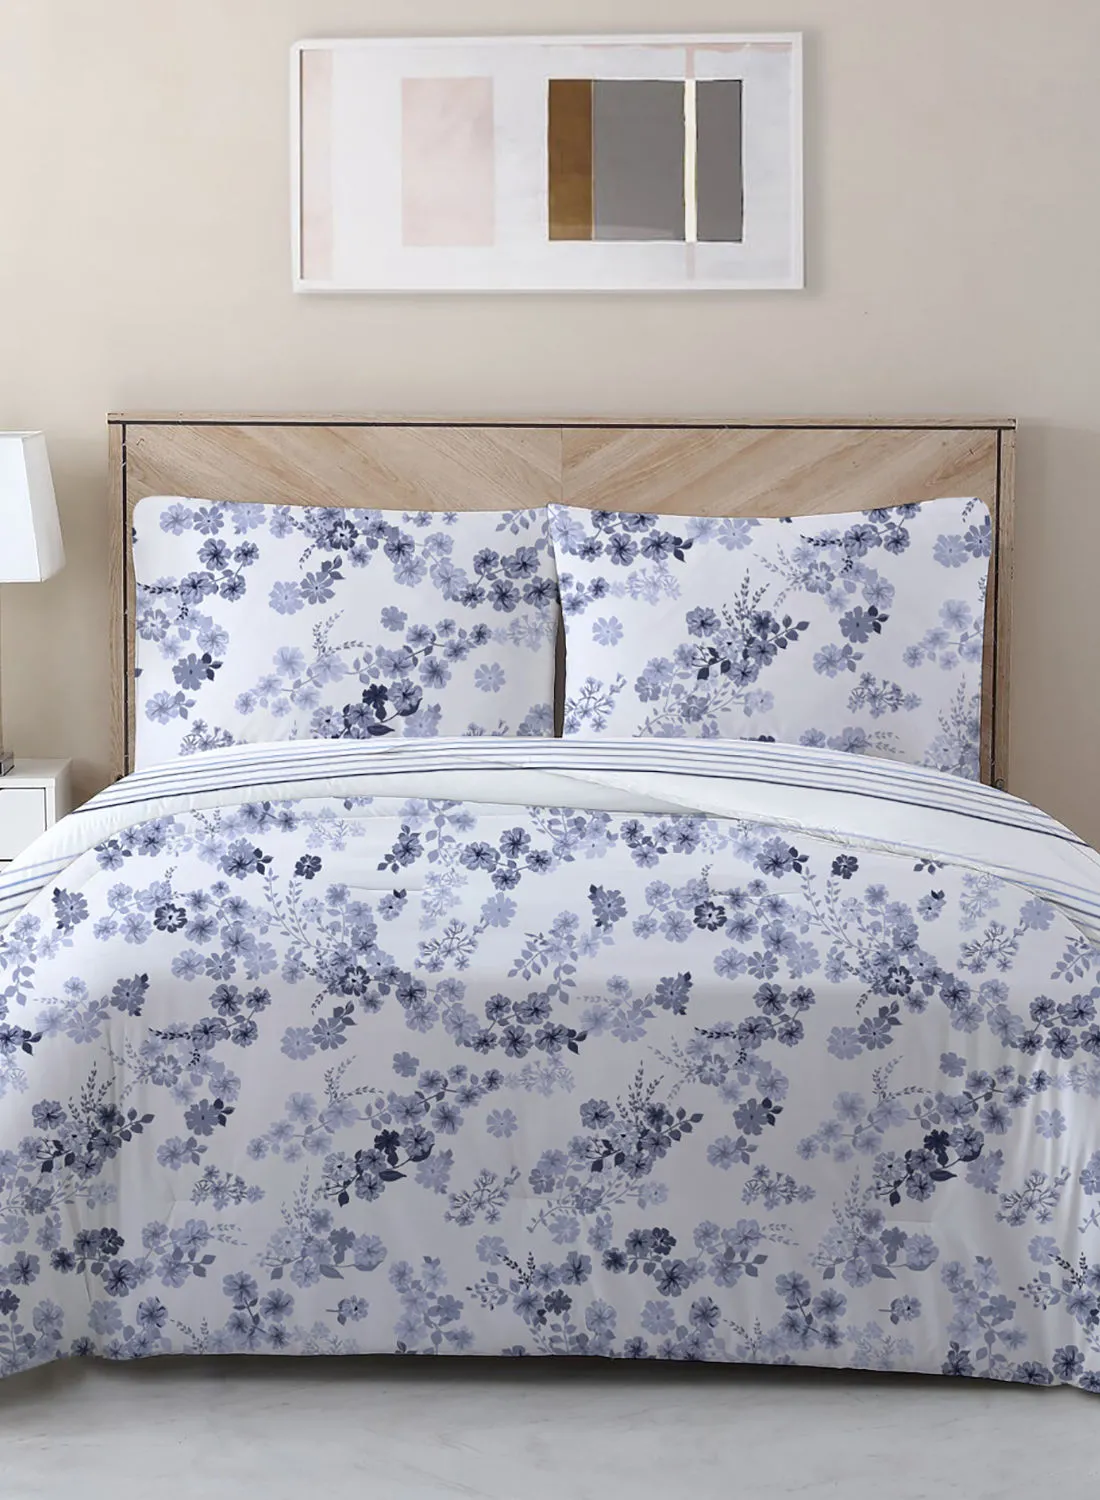 Amal Comforter Set King Size All Season Everyday Use Bedding Set 100% Cotton 3 Pieces 1 Comforter 2 Pillow Covers  Floral Blue